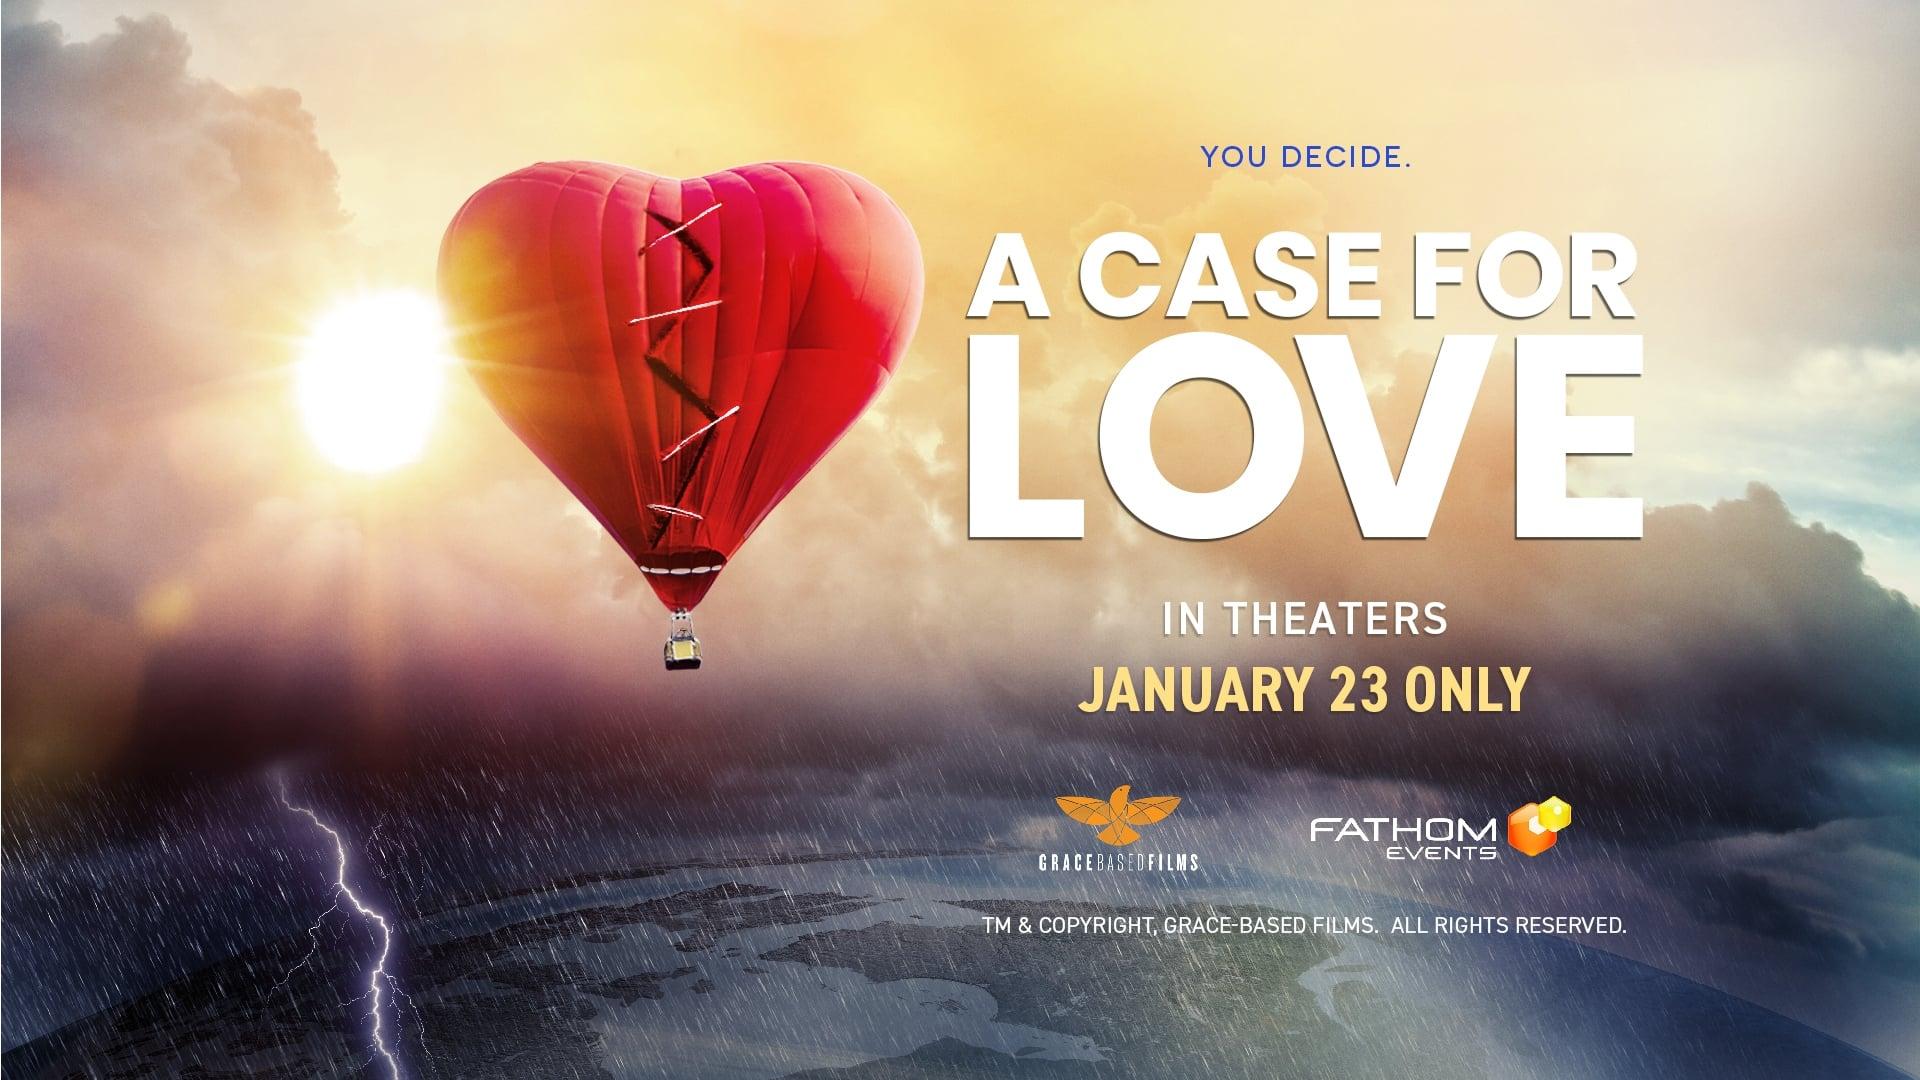 A Case for Love backdrop